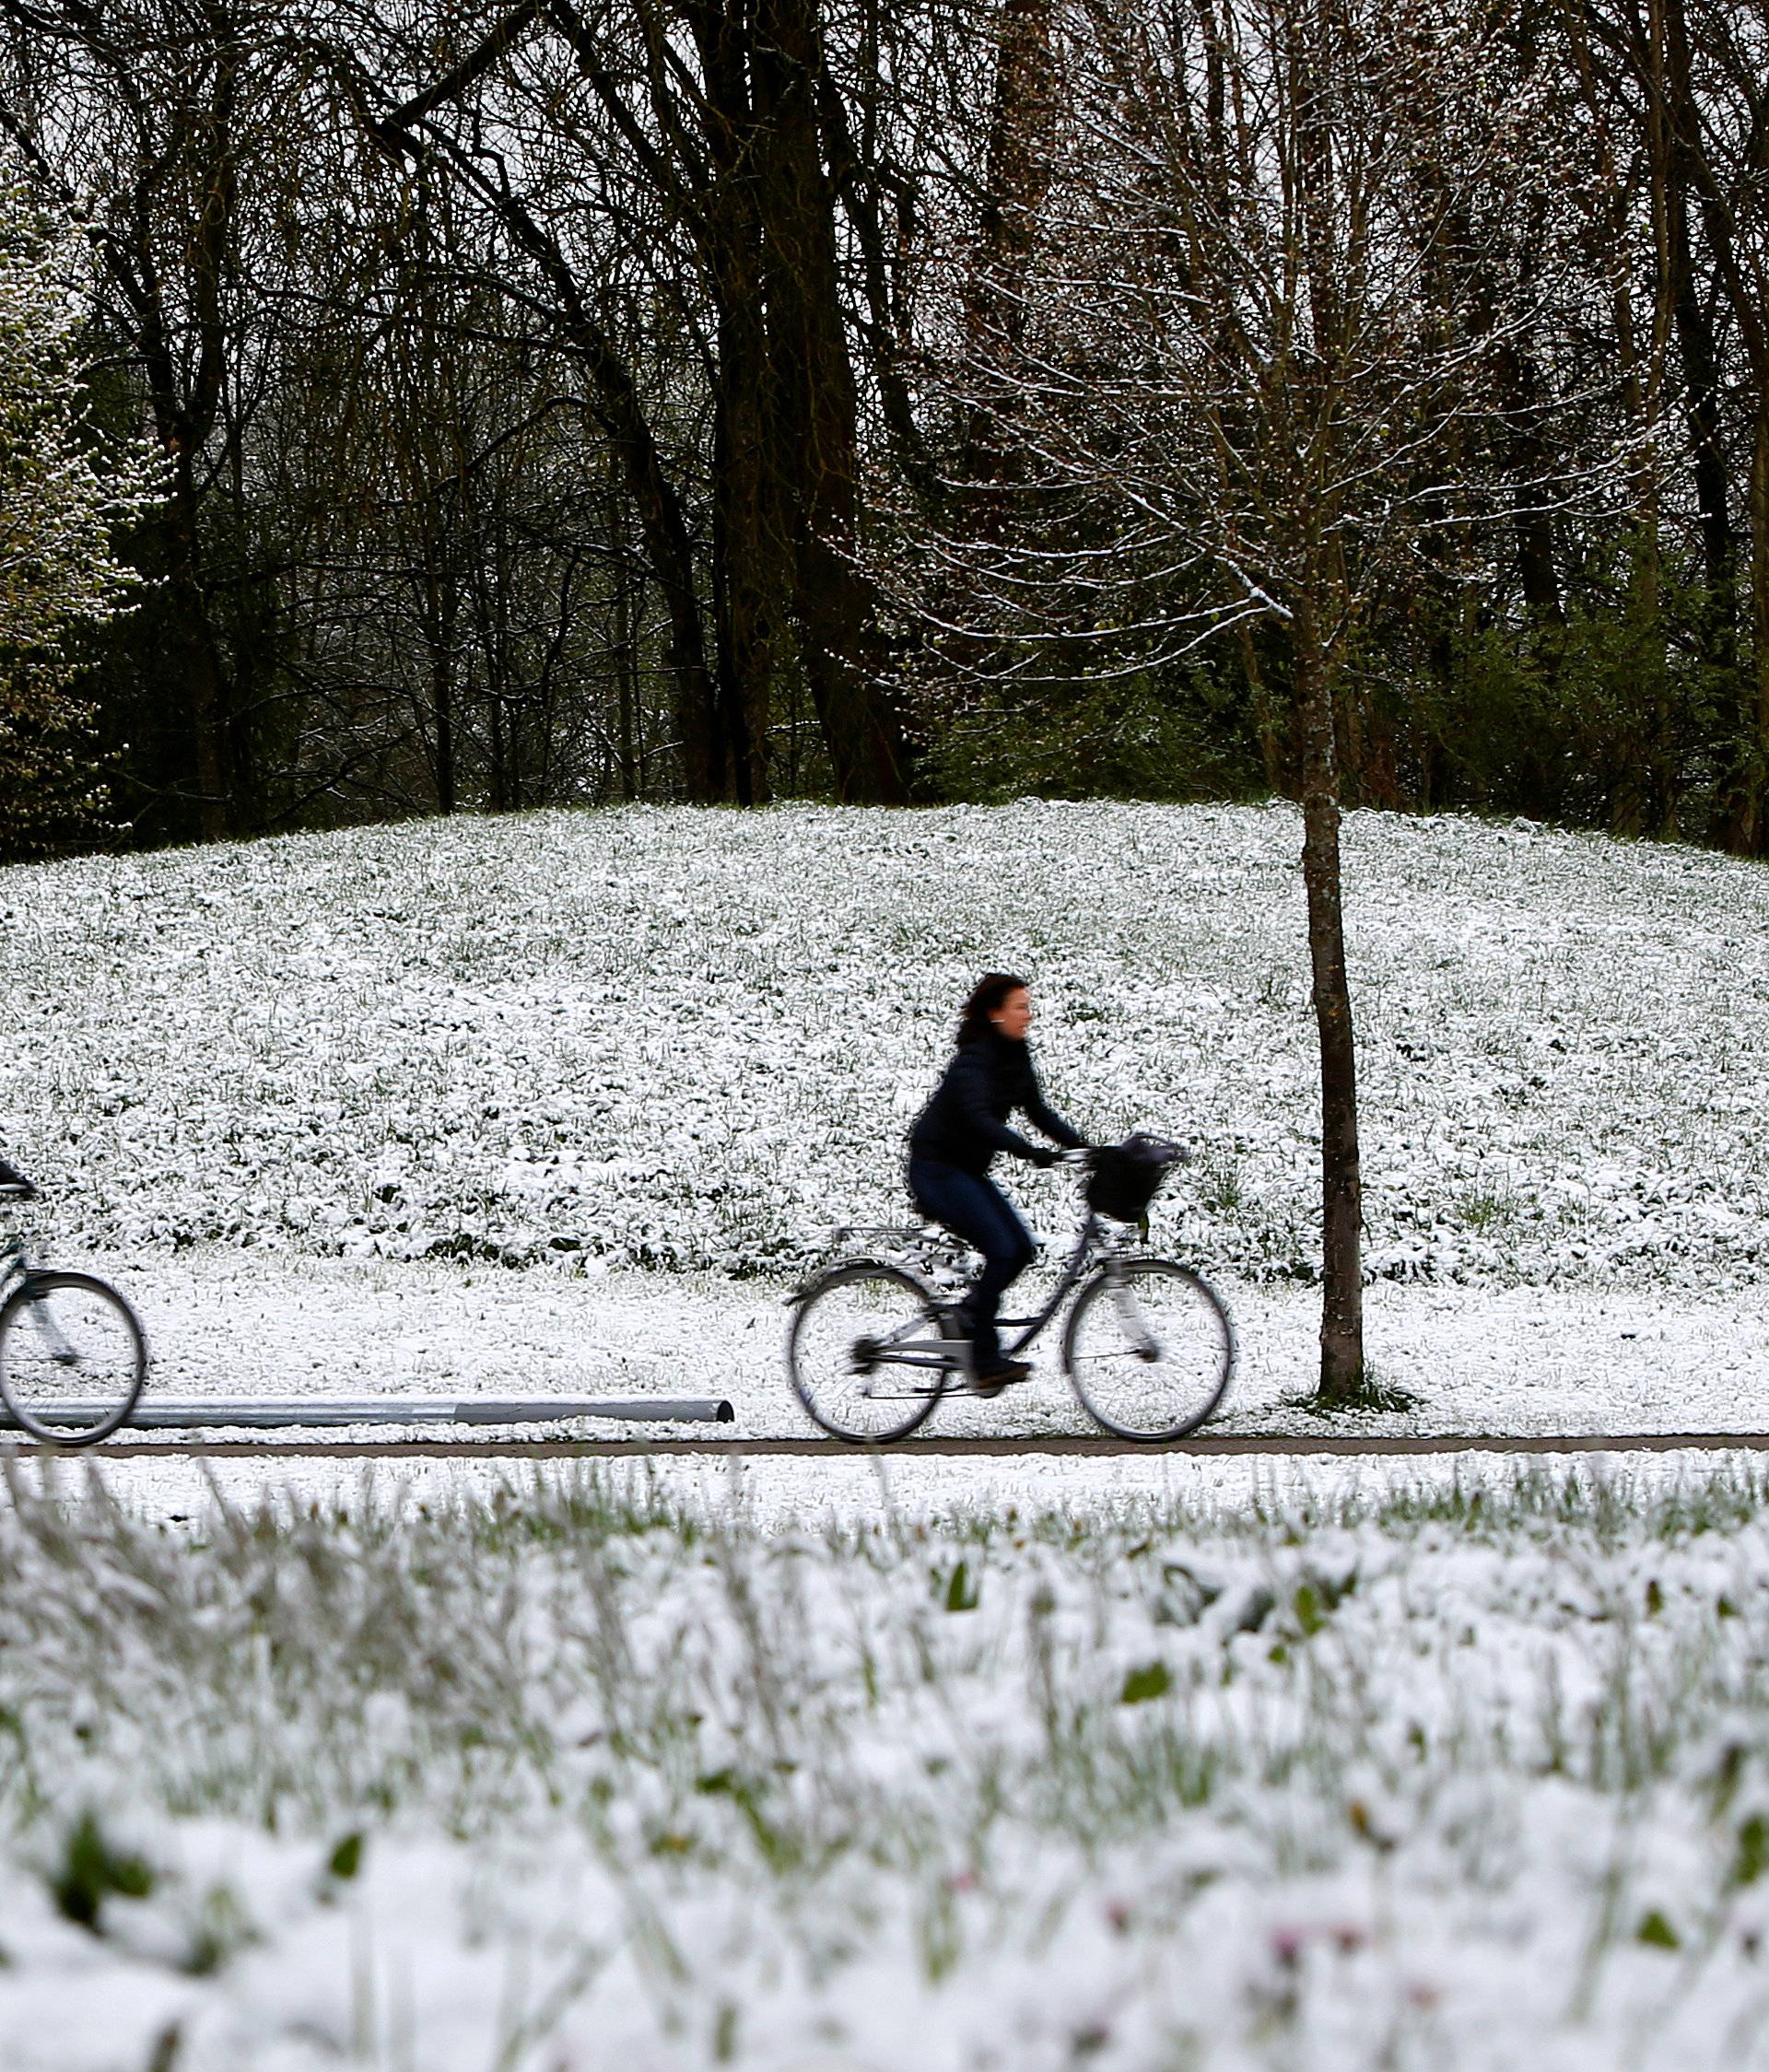 Cyclists pass snow-covered meadow in Eichenau